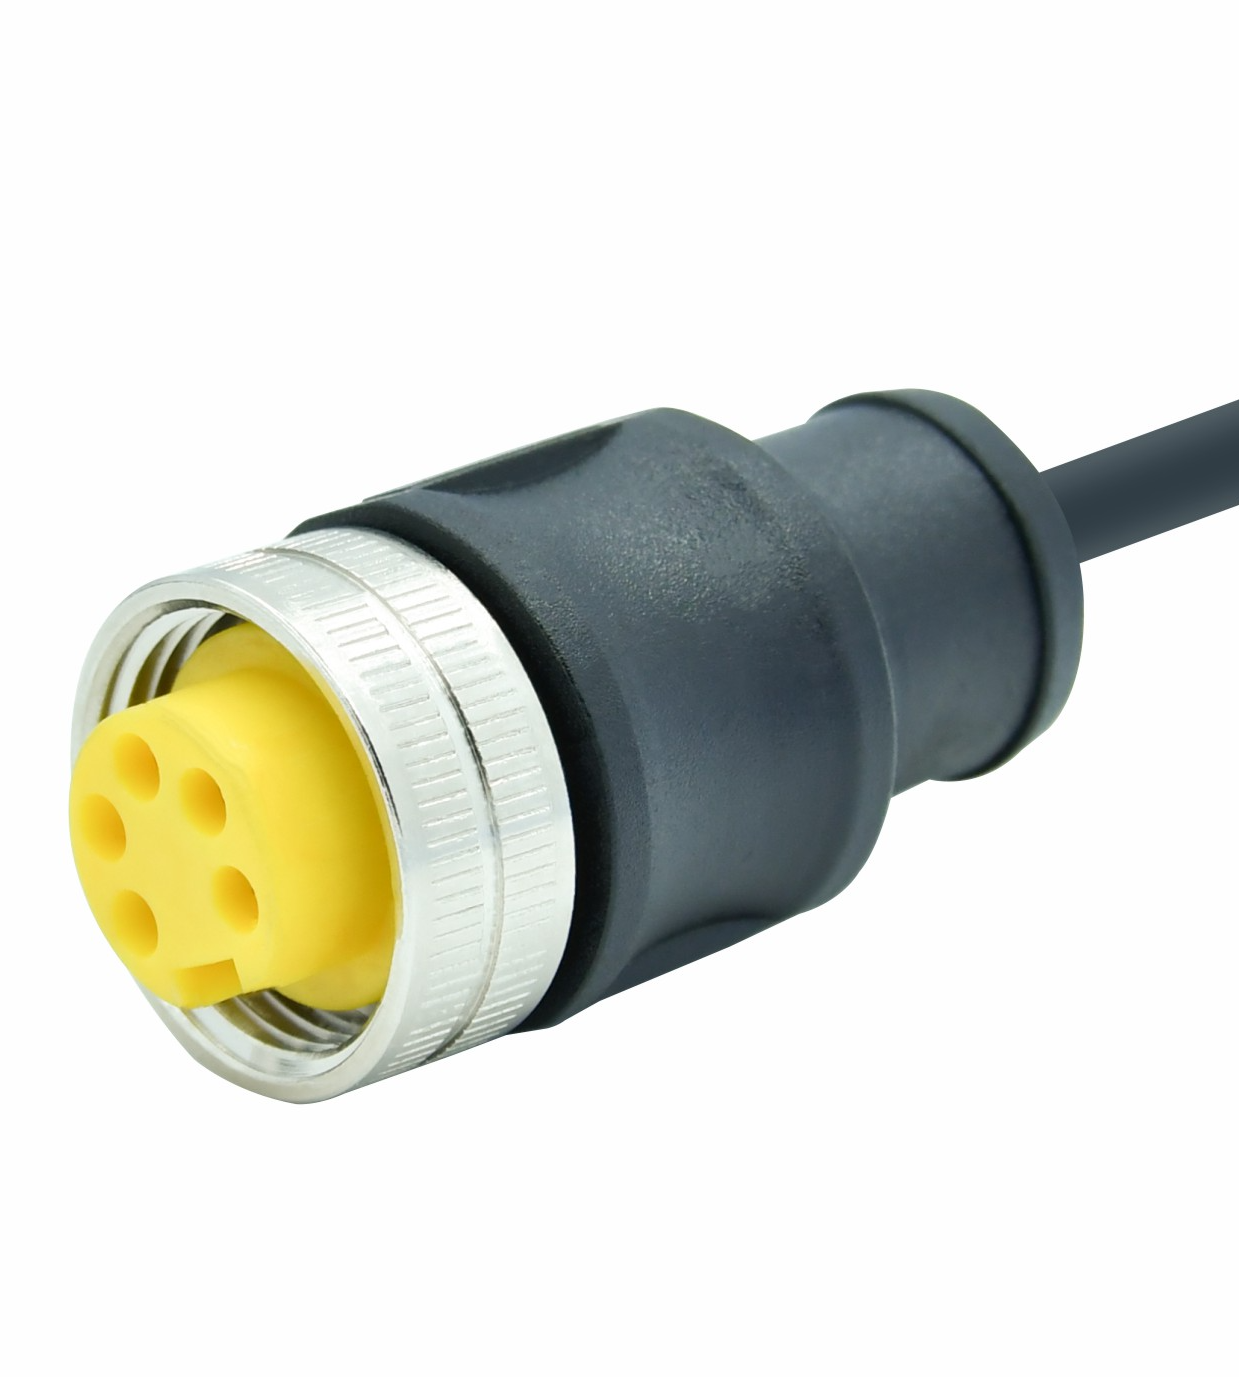 Rigoal Circular Connectors: Premium Quality for Robust Industrial Solutions